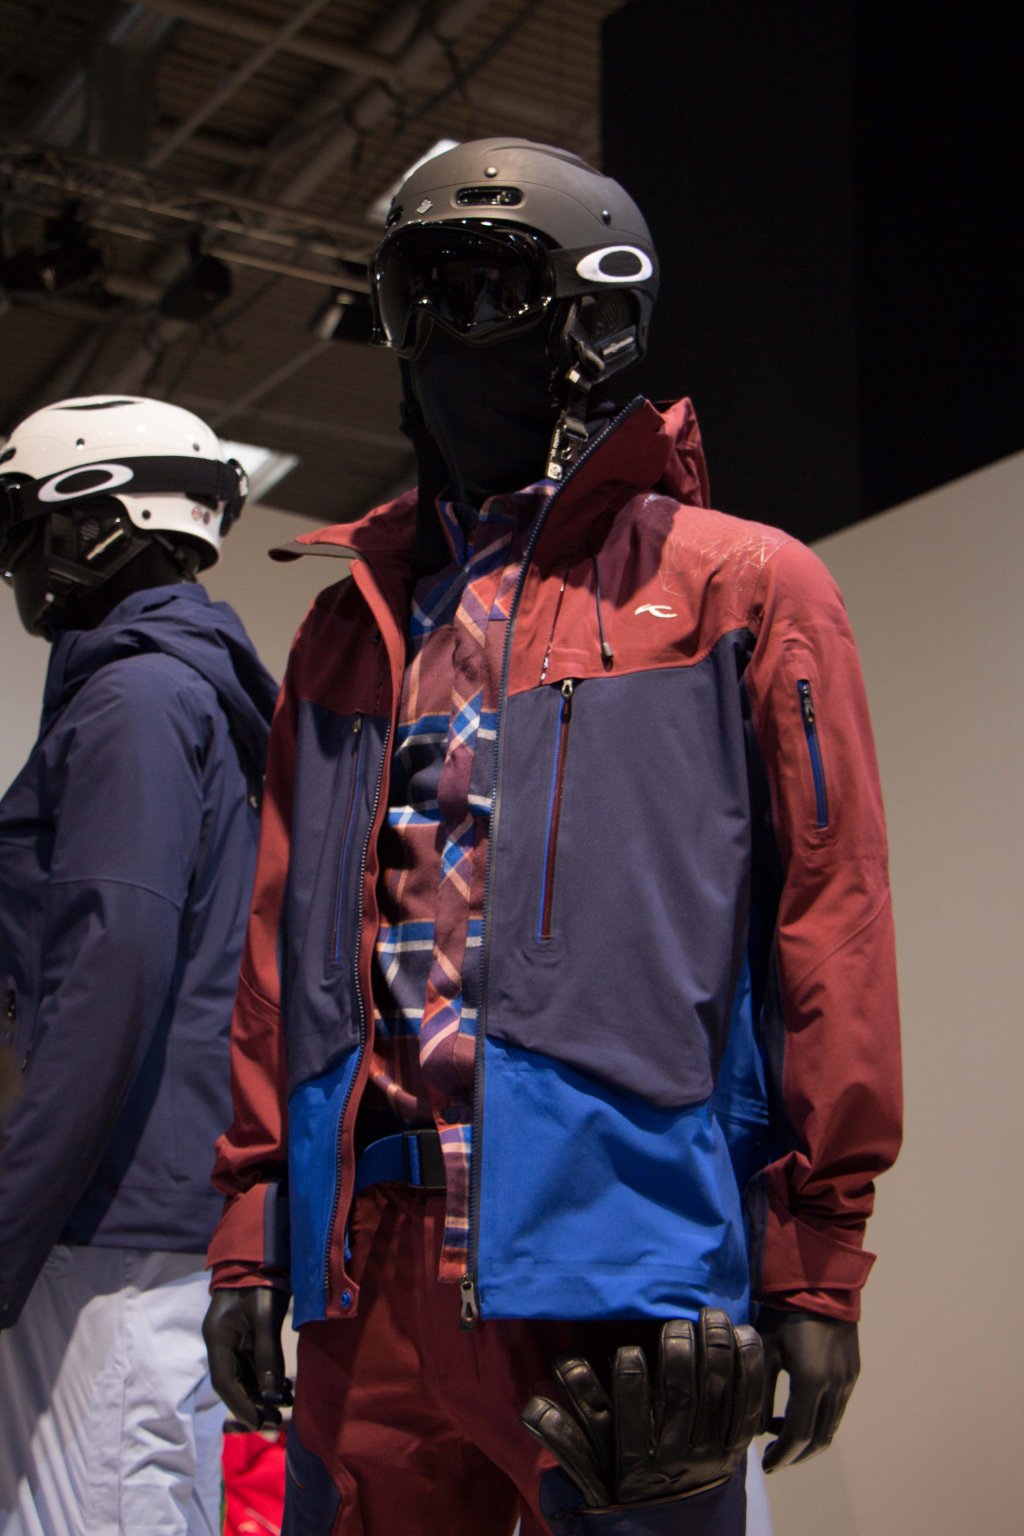 Kjus Men FRX Pro Jacket - FRX is the freeride collection from Kjus.